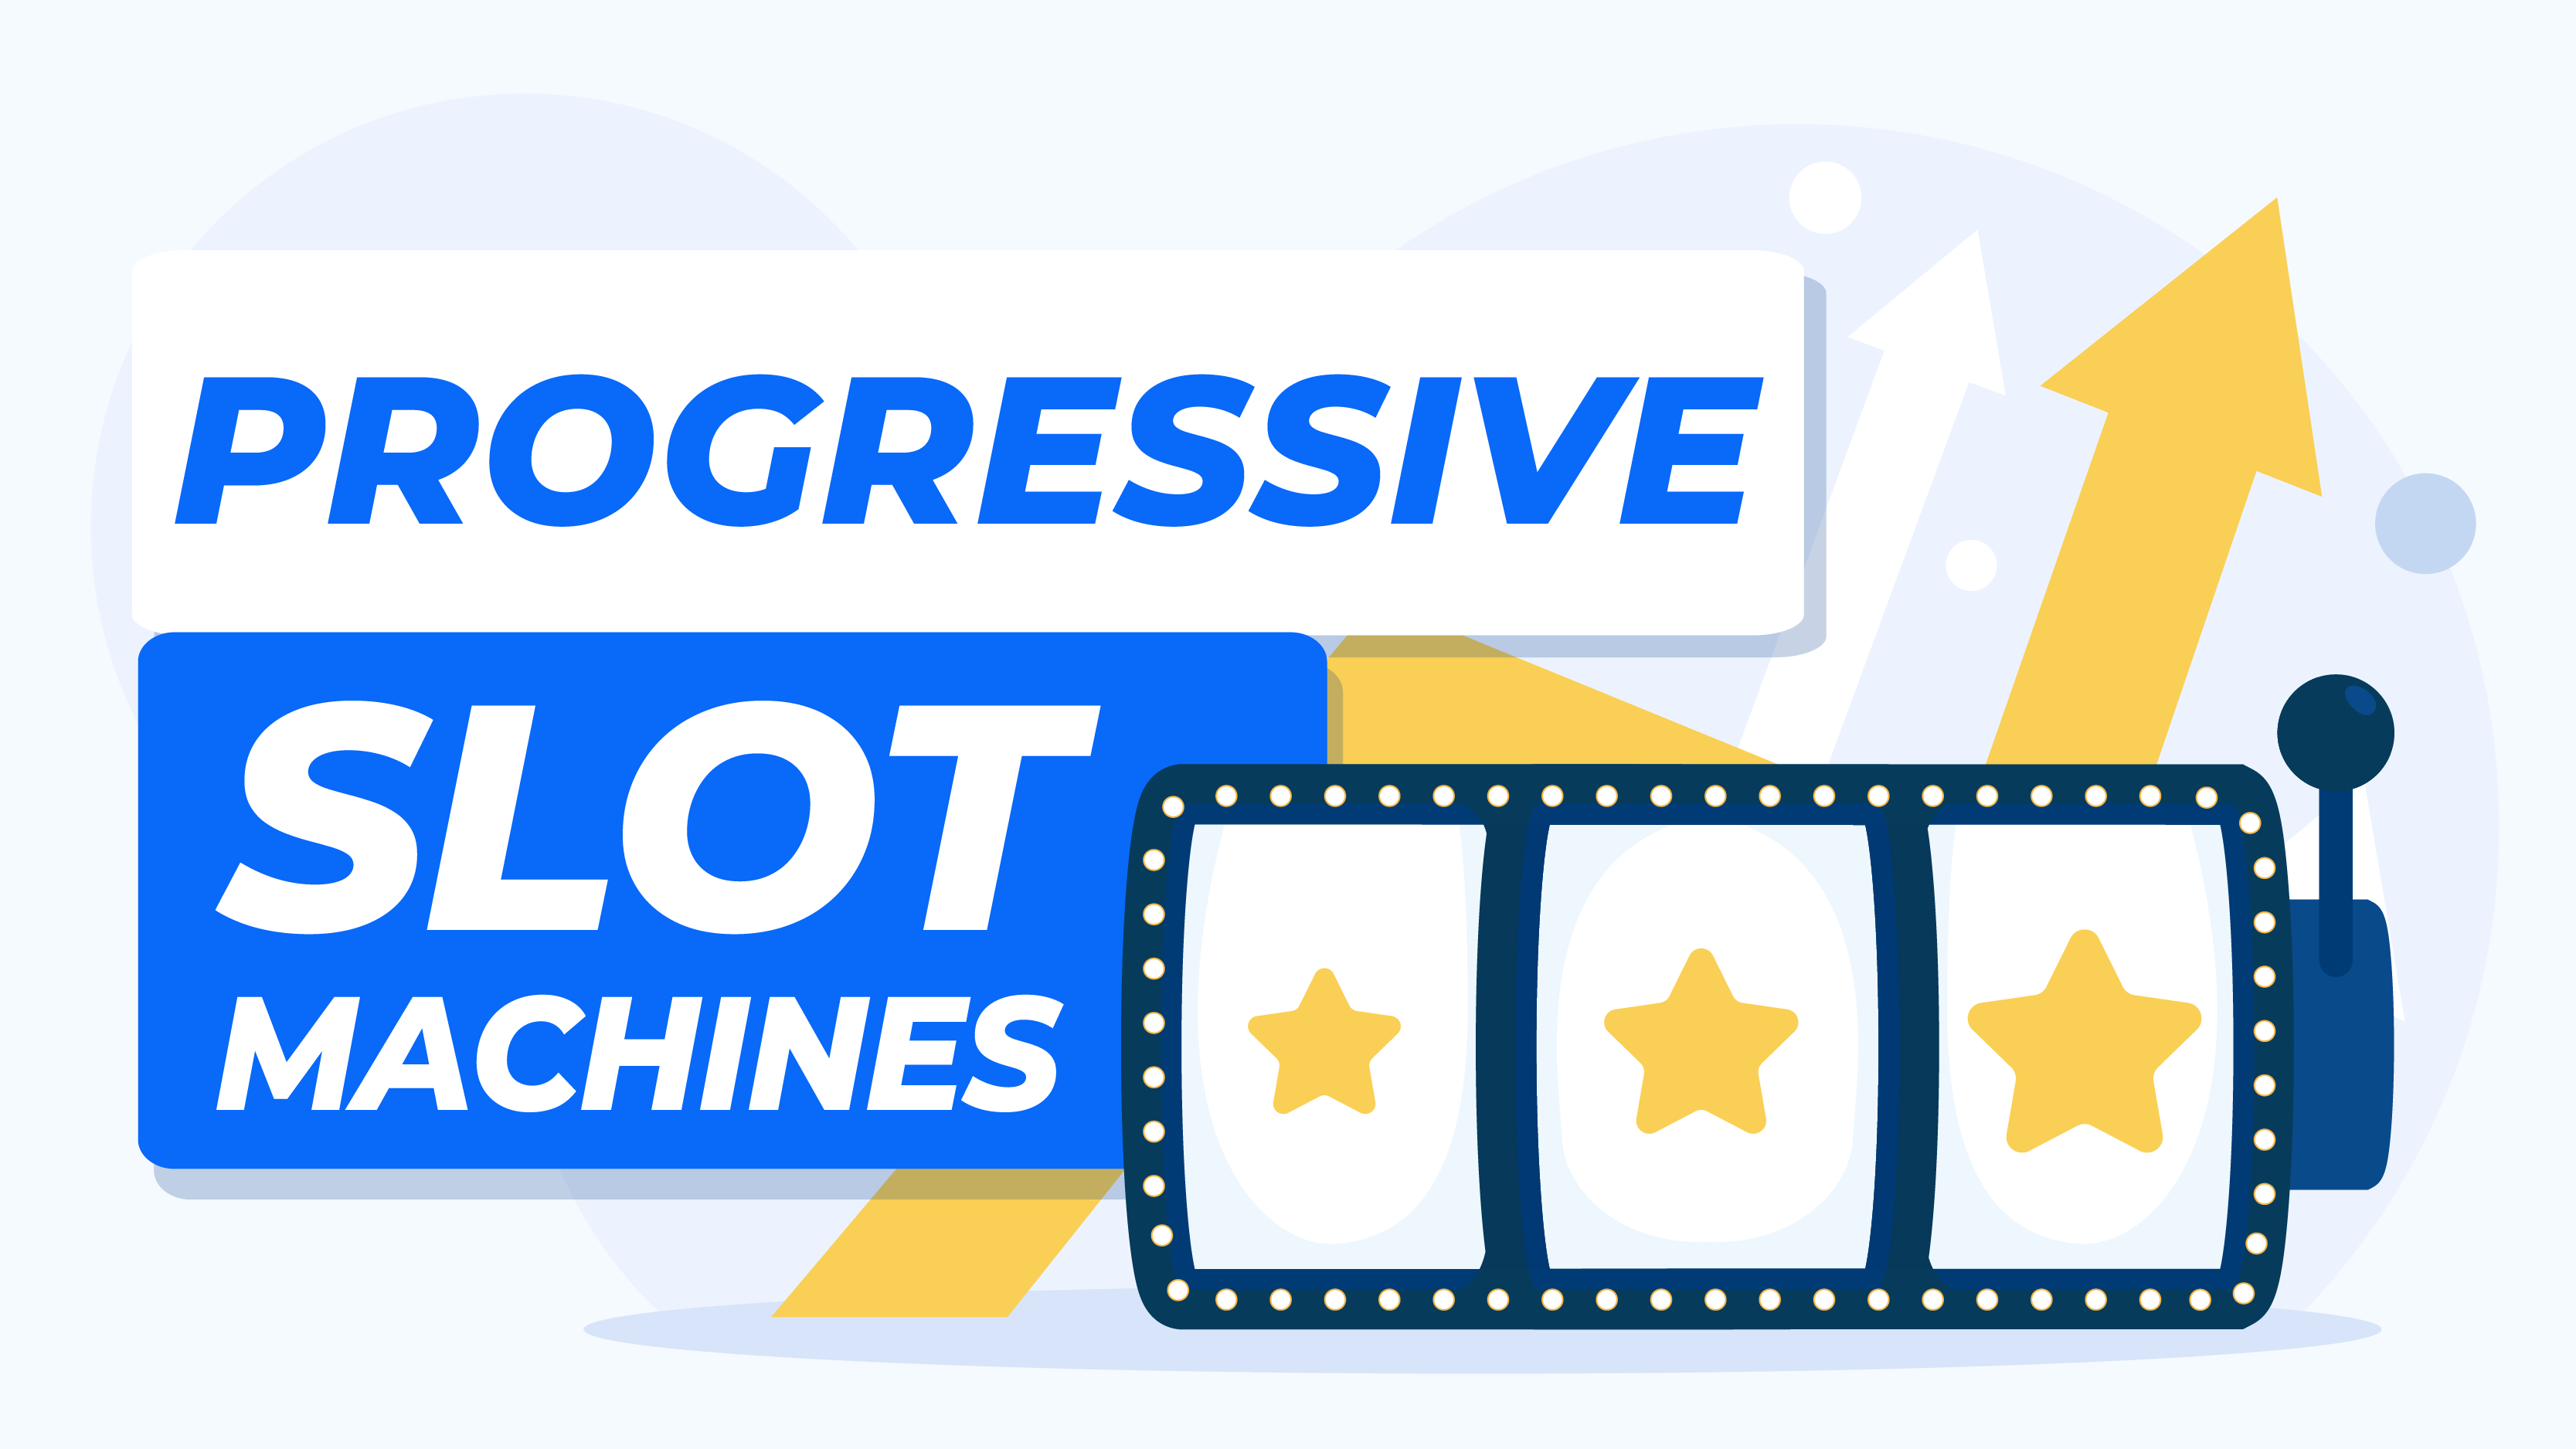 Progressive Slot Machines| Learn the Myths & Discover The Best Games